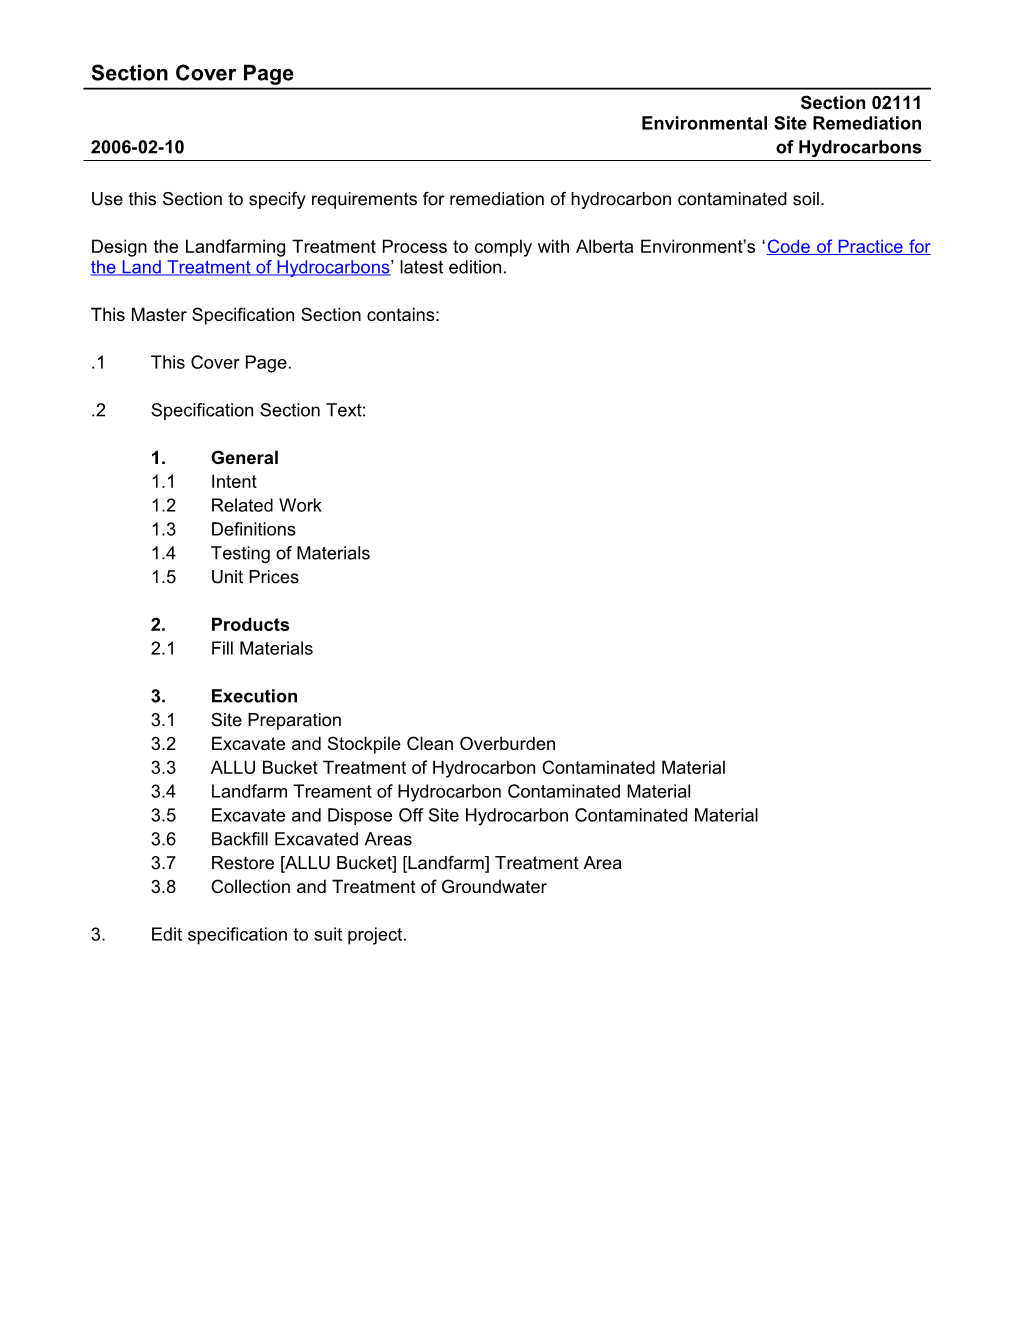 02111 - Environmental Site Remediation Or Hydrocarbons